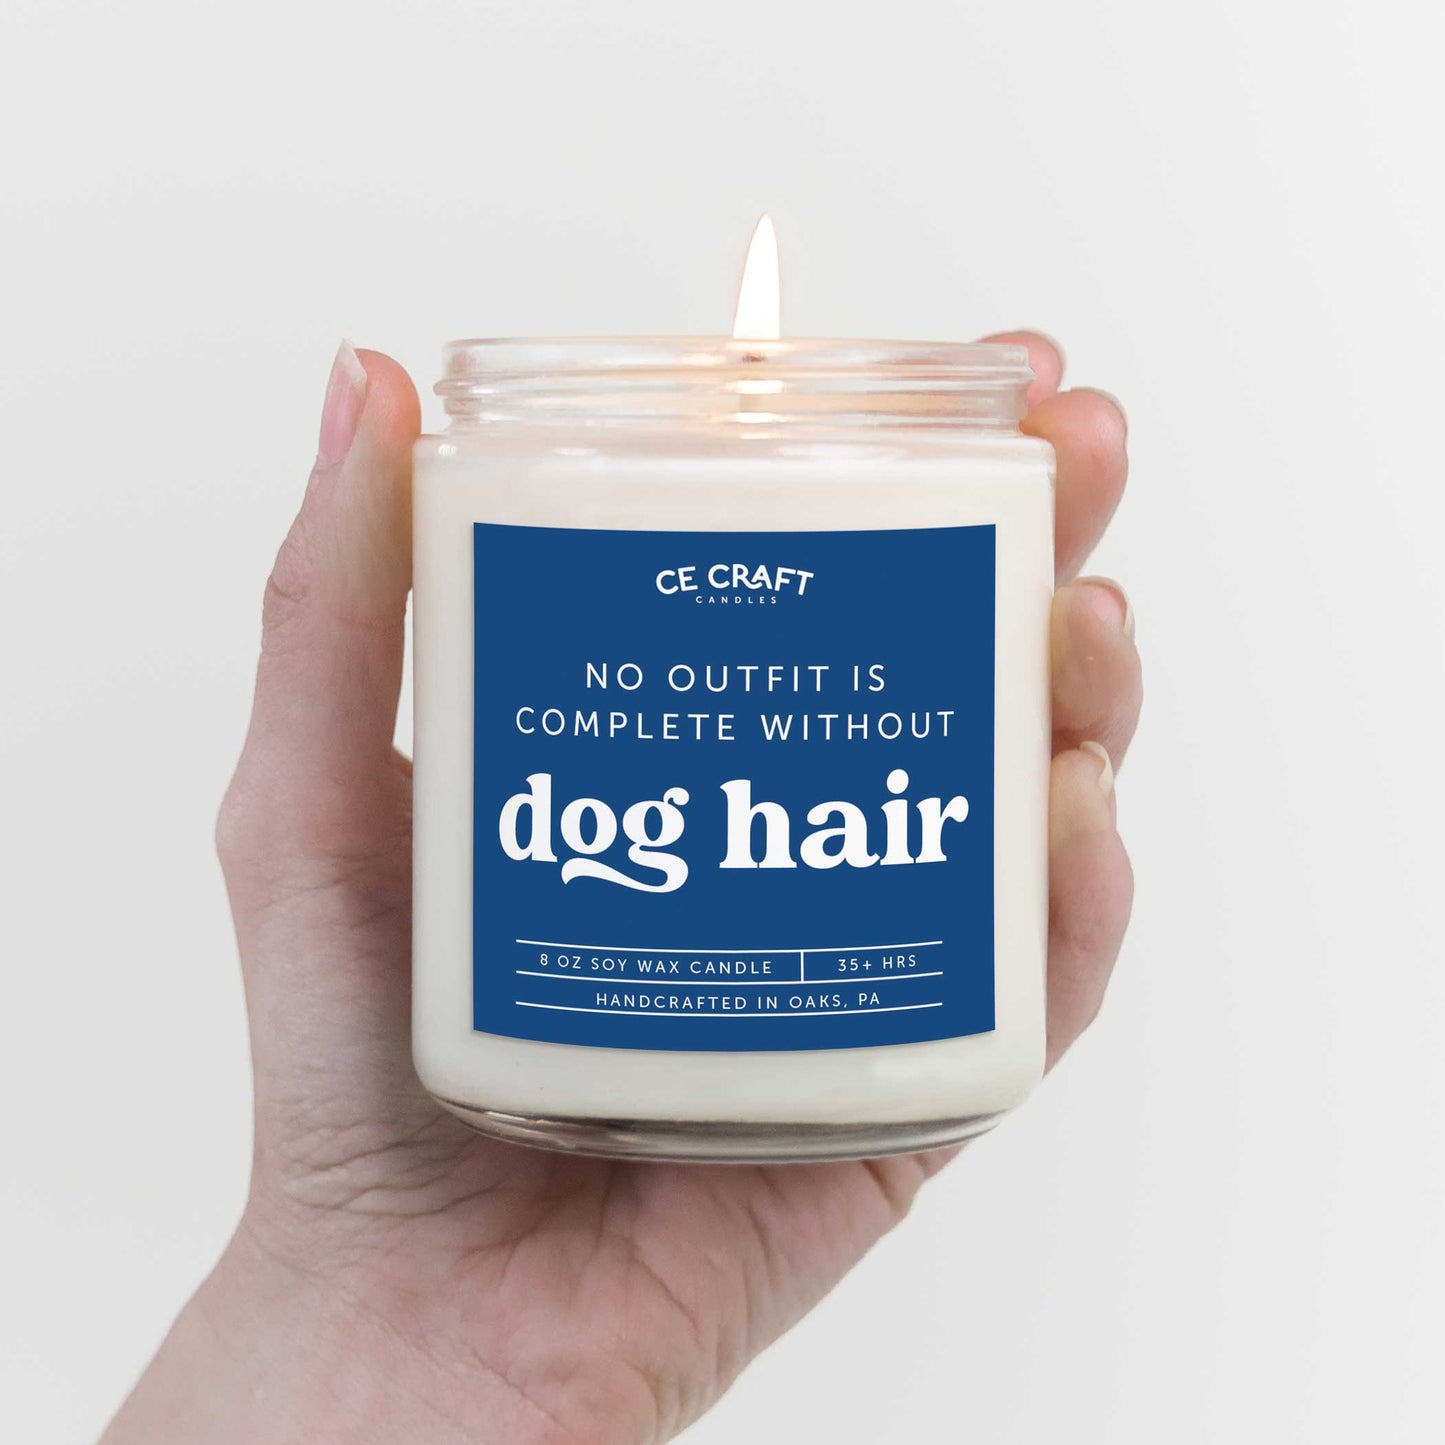 No Outfit is Complete Without Dog Hair Soy Wax Candle Candles CE Craft 